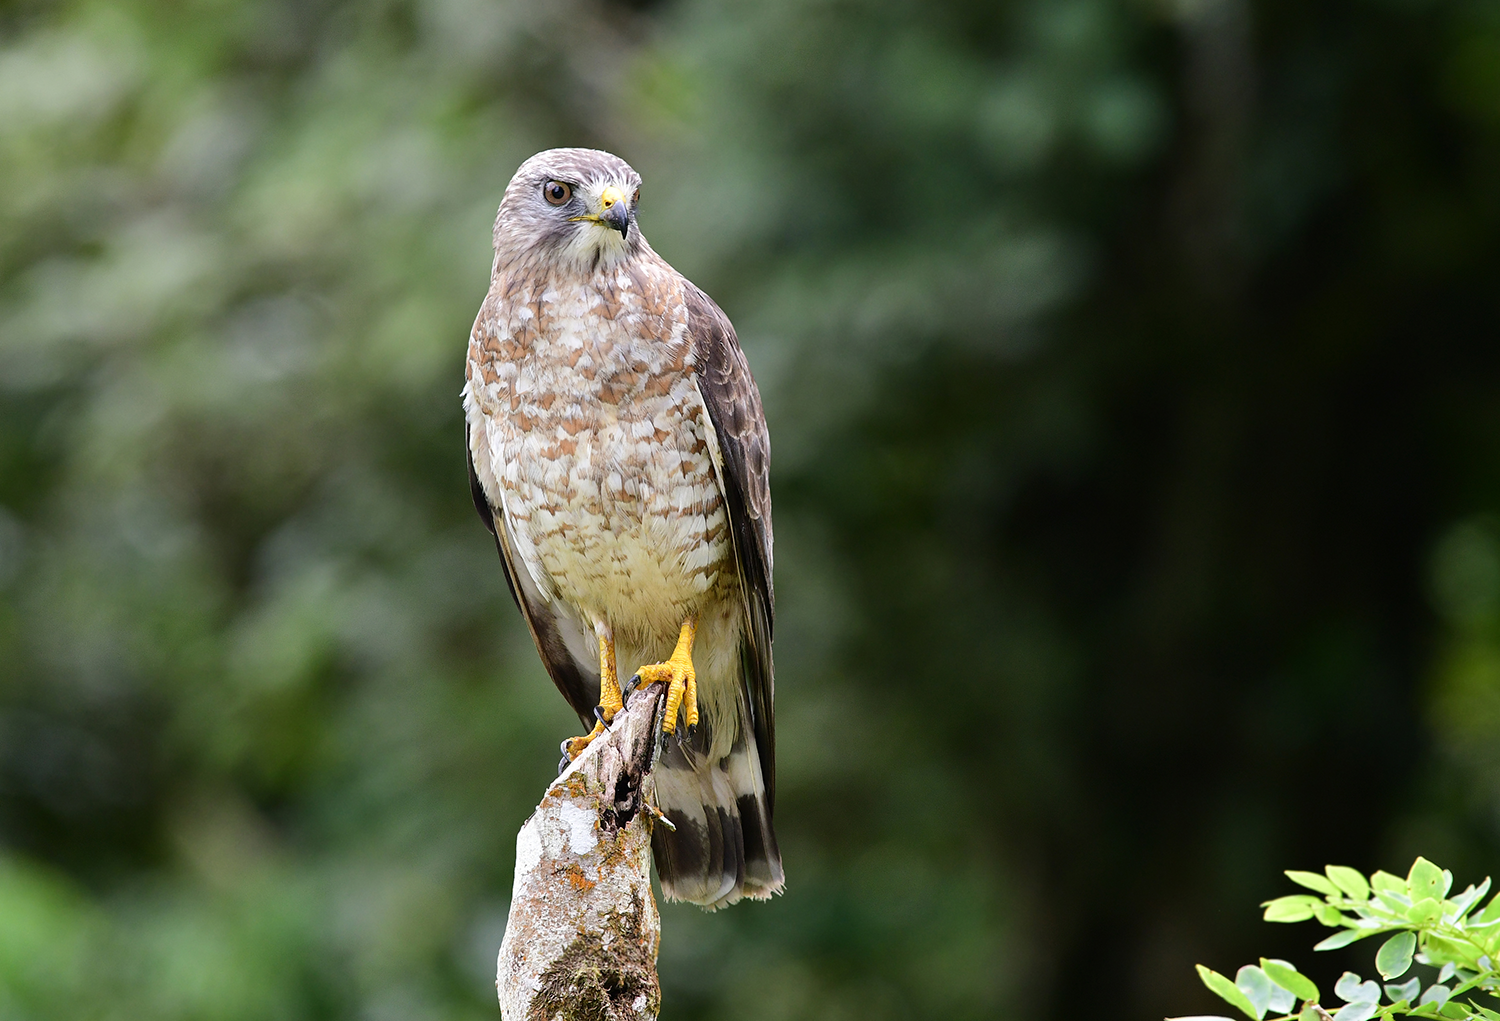 A brown and white hawk with yellow talons sits on a tree stump.